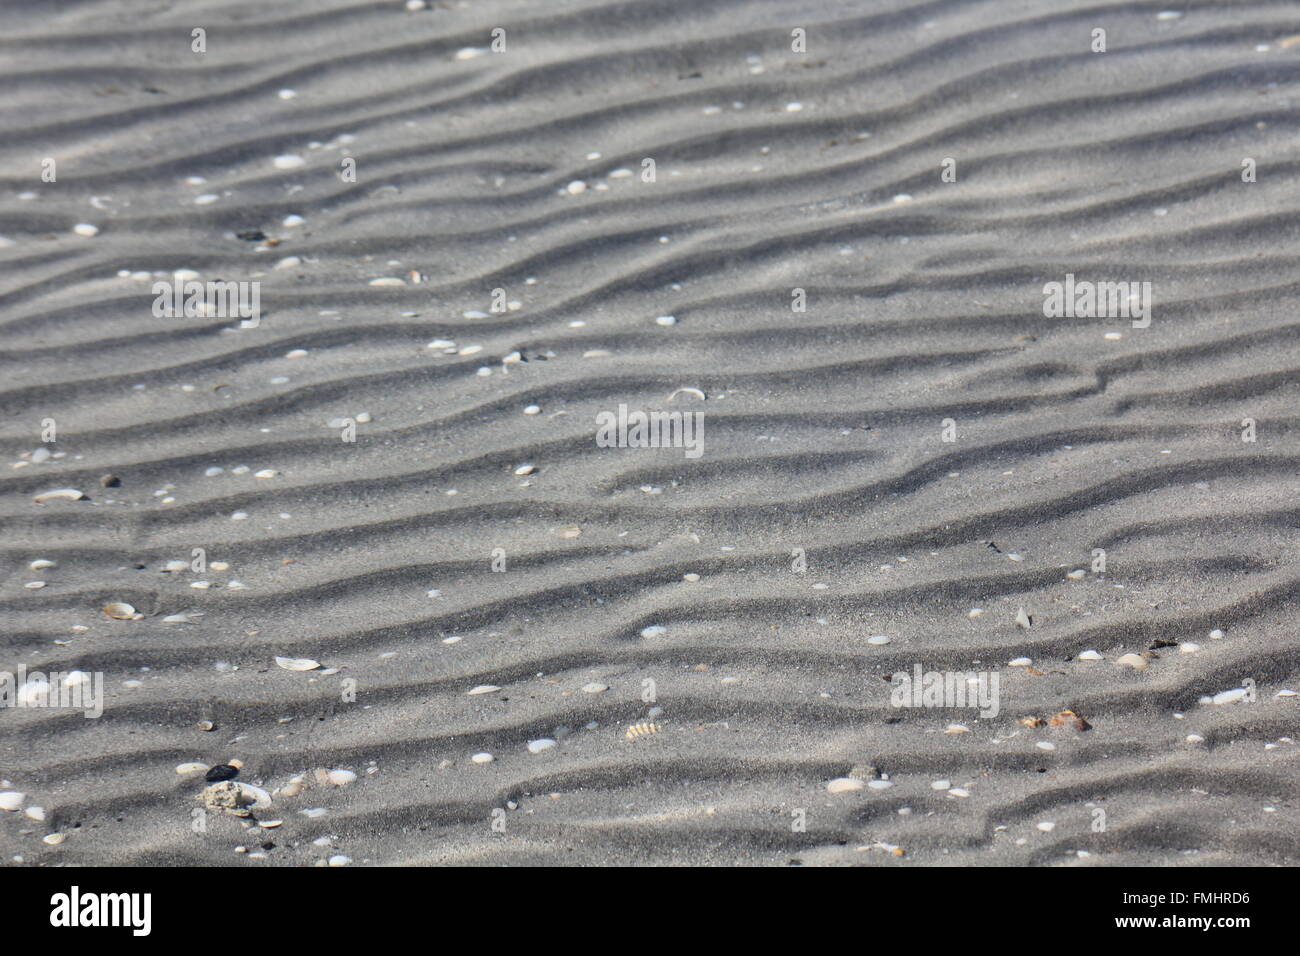 Background with crystal clear water and small waves Stock Photo